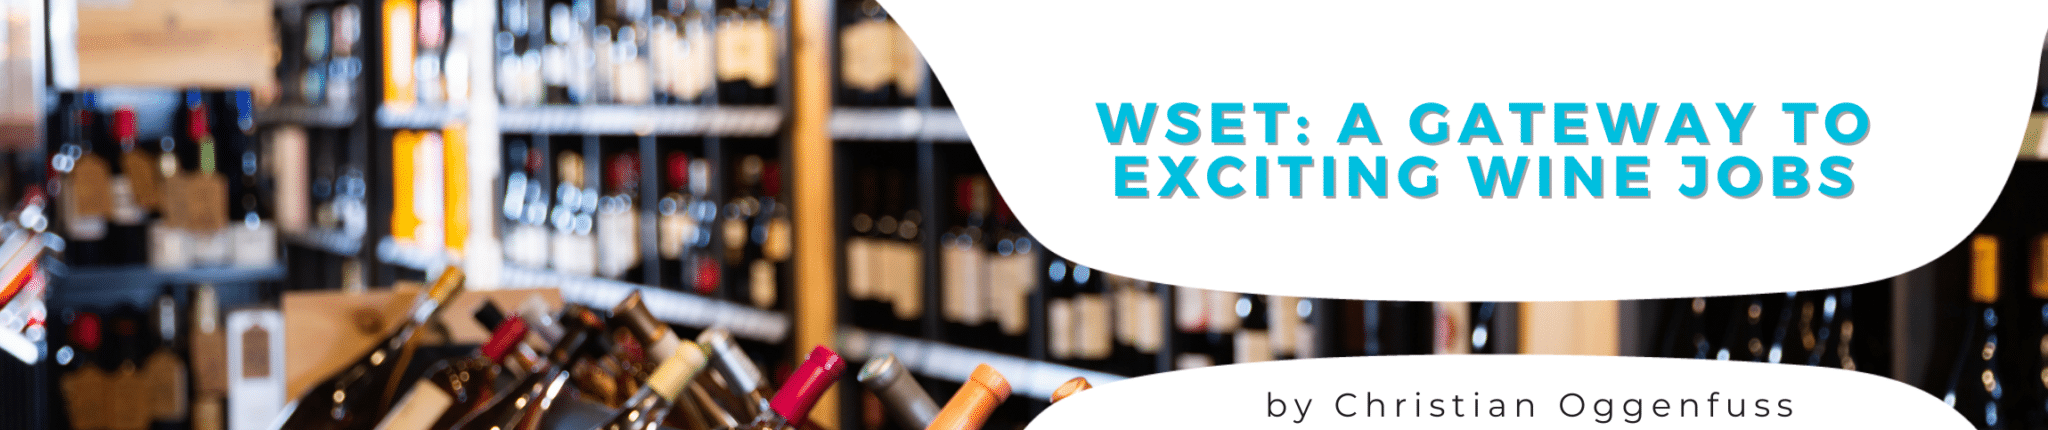 WSET: A Gateway to Exciting Wine Jobs